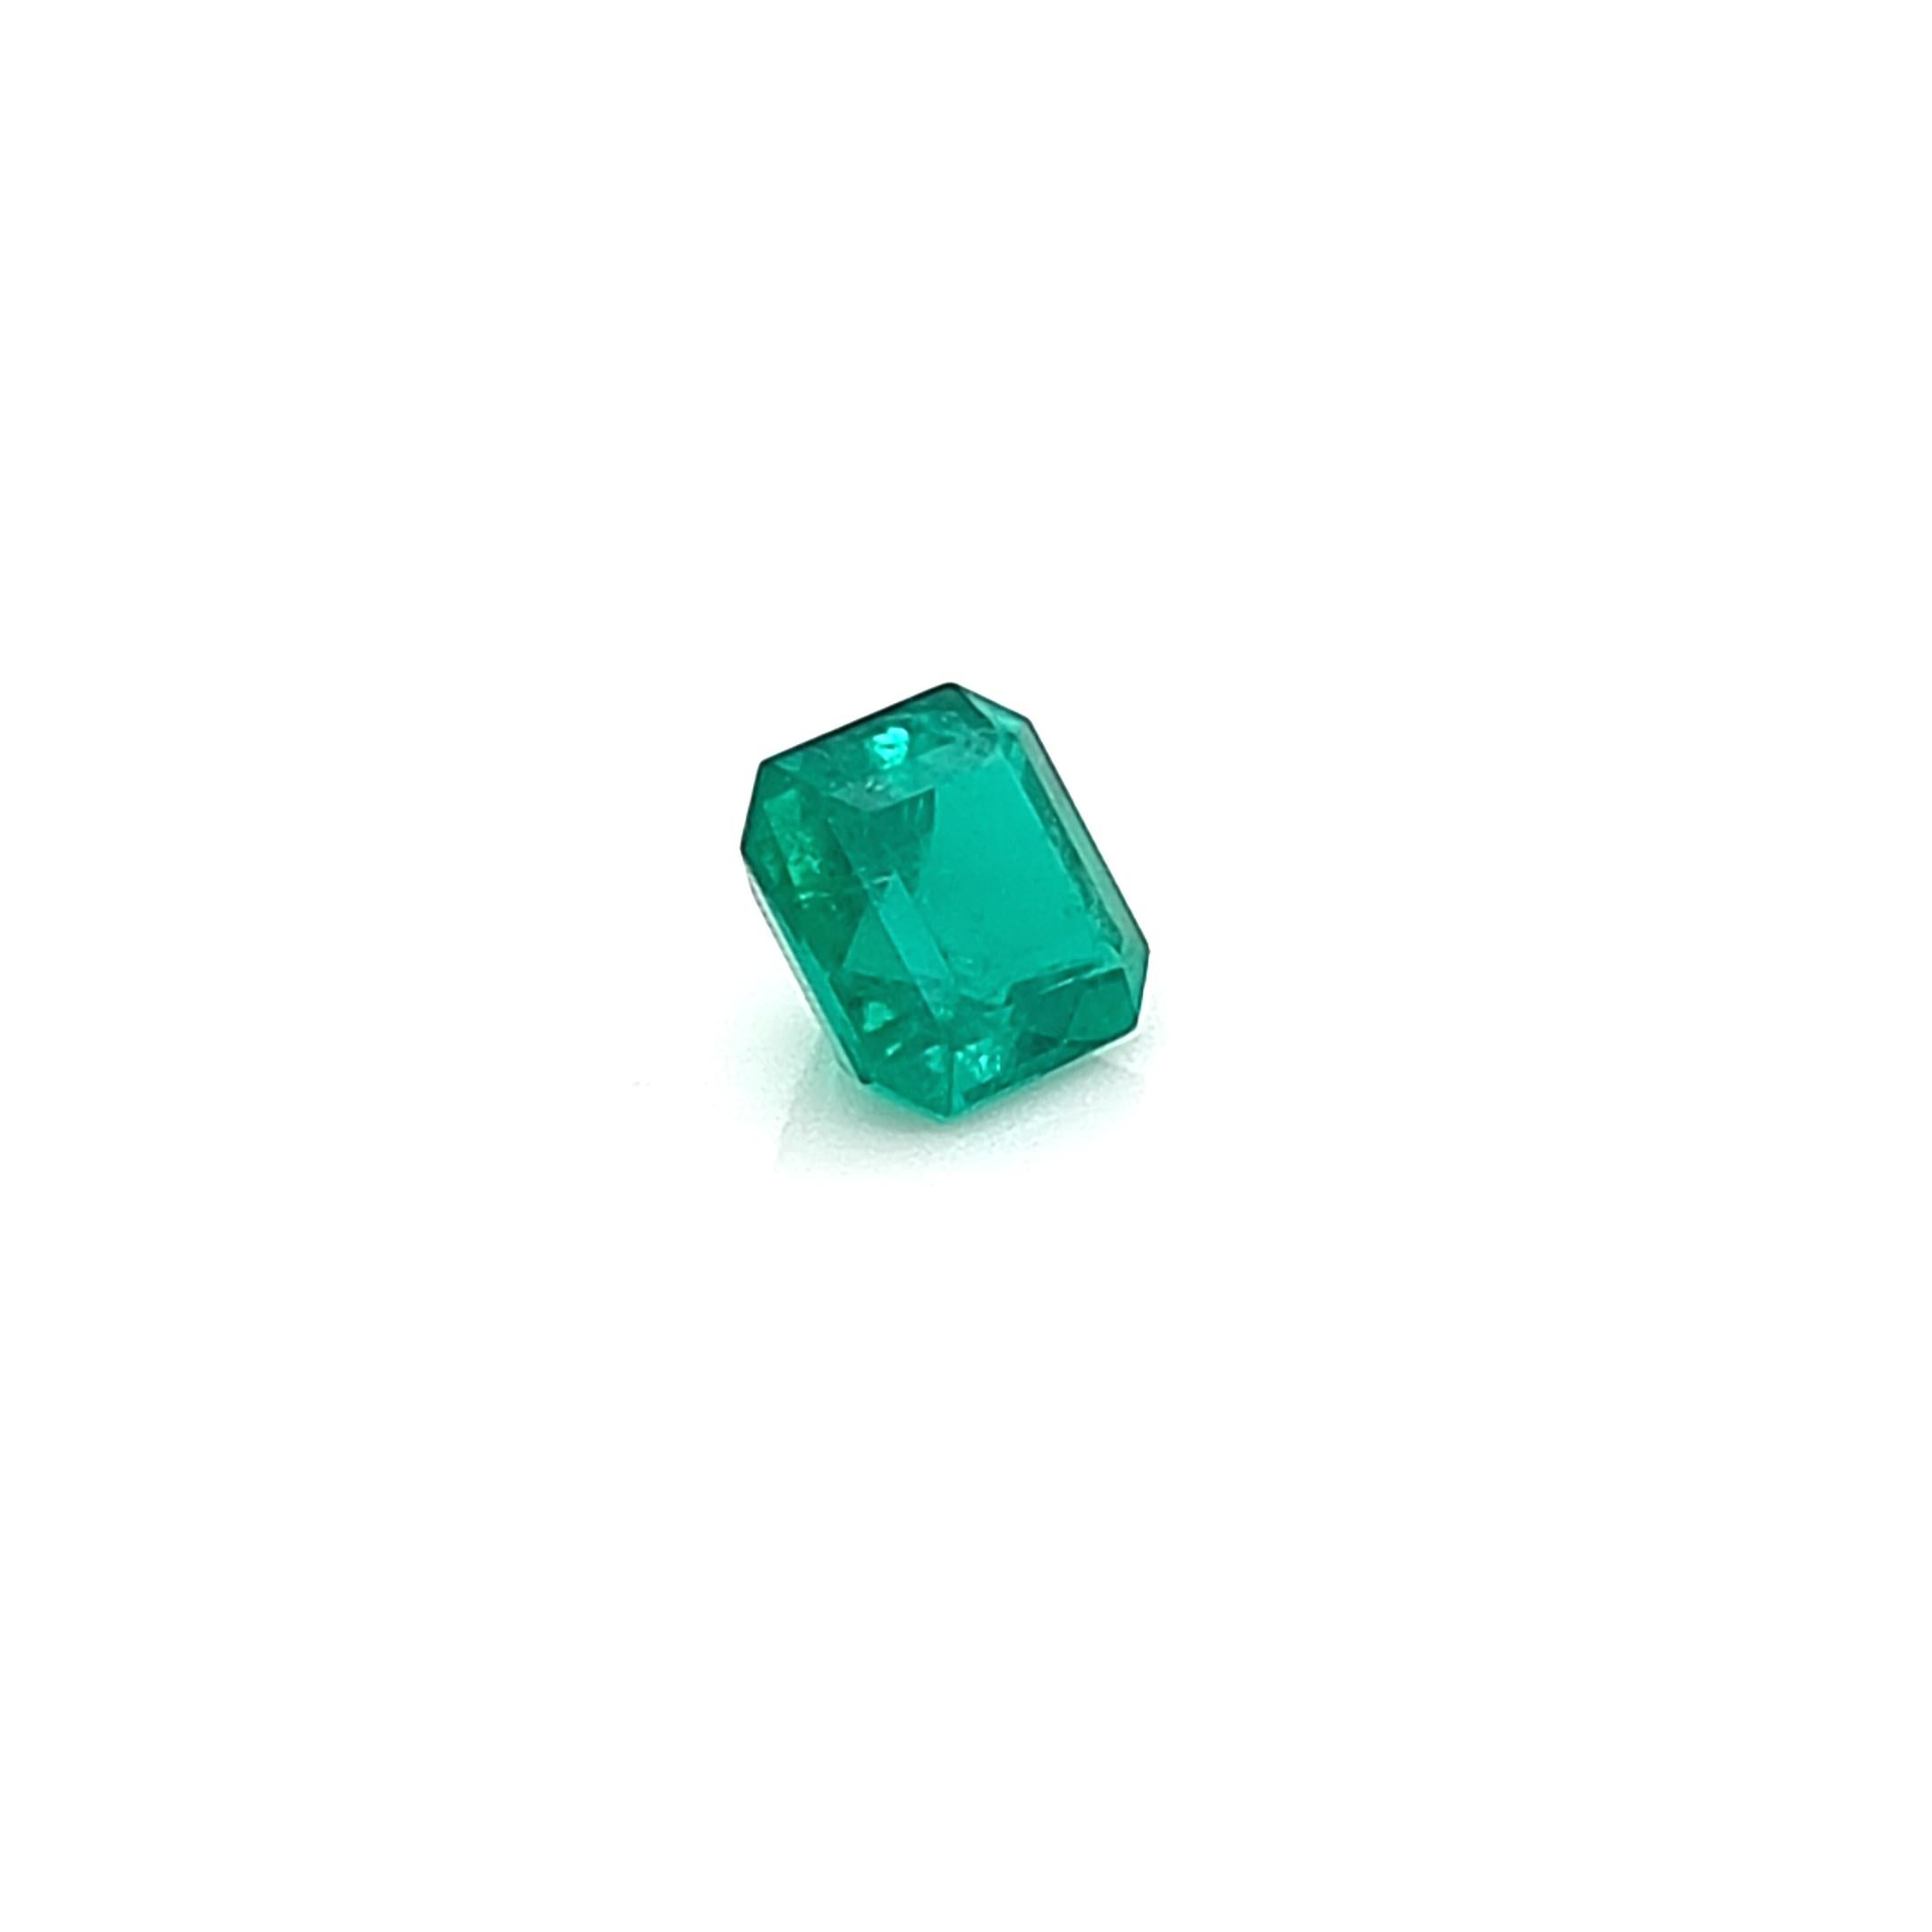 Colombian Emerald.
GIA Certified
Treatment: Clarity Enhanced (F2)

1.55 carats

7.05 x 6.96 x 5.06